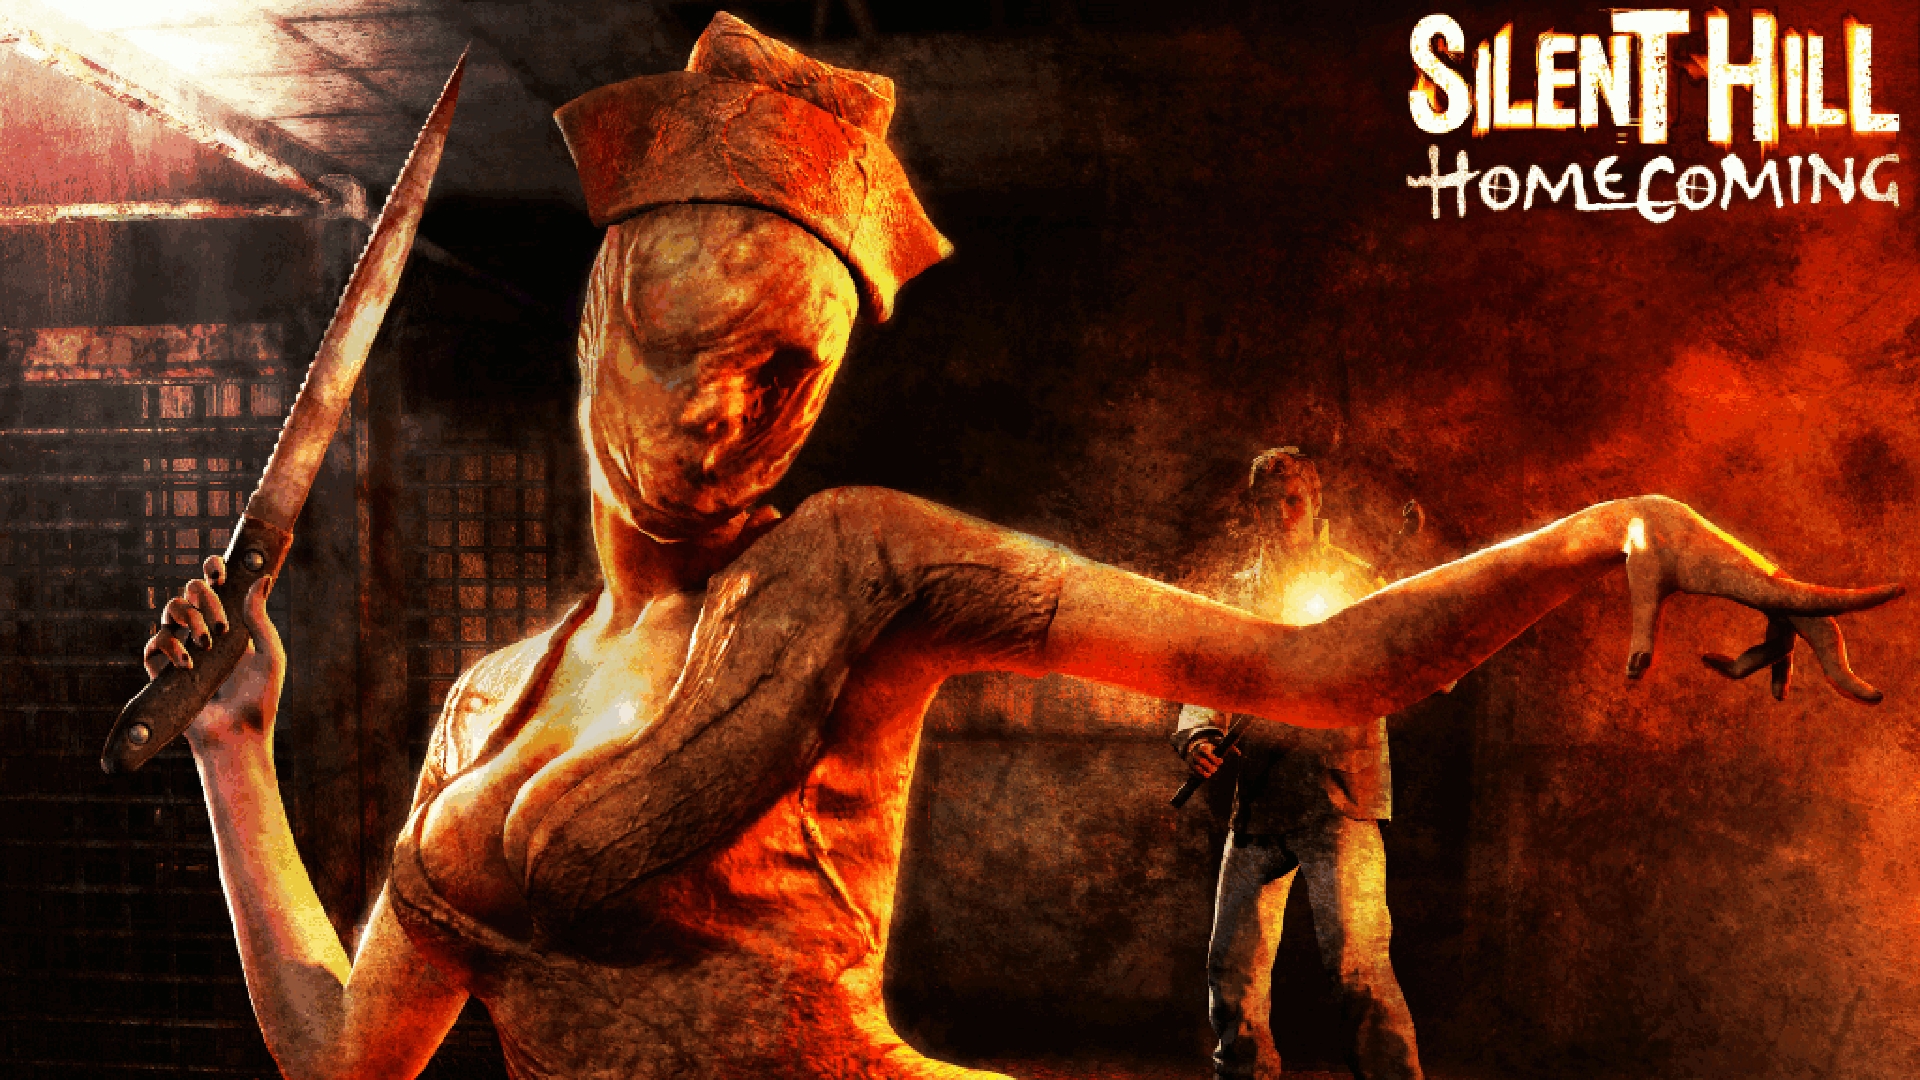 Silent Hill Homecoming Submitted by Morkot